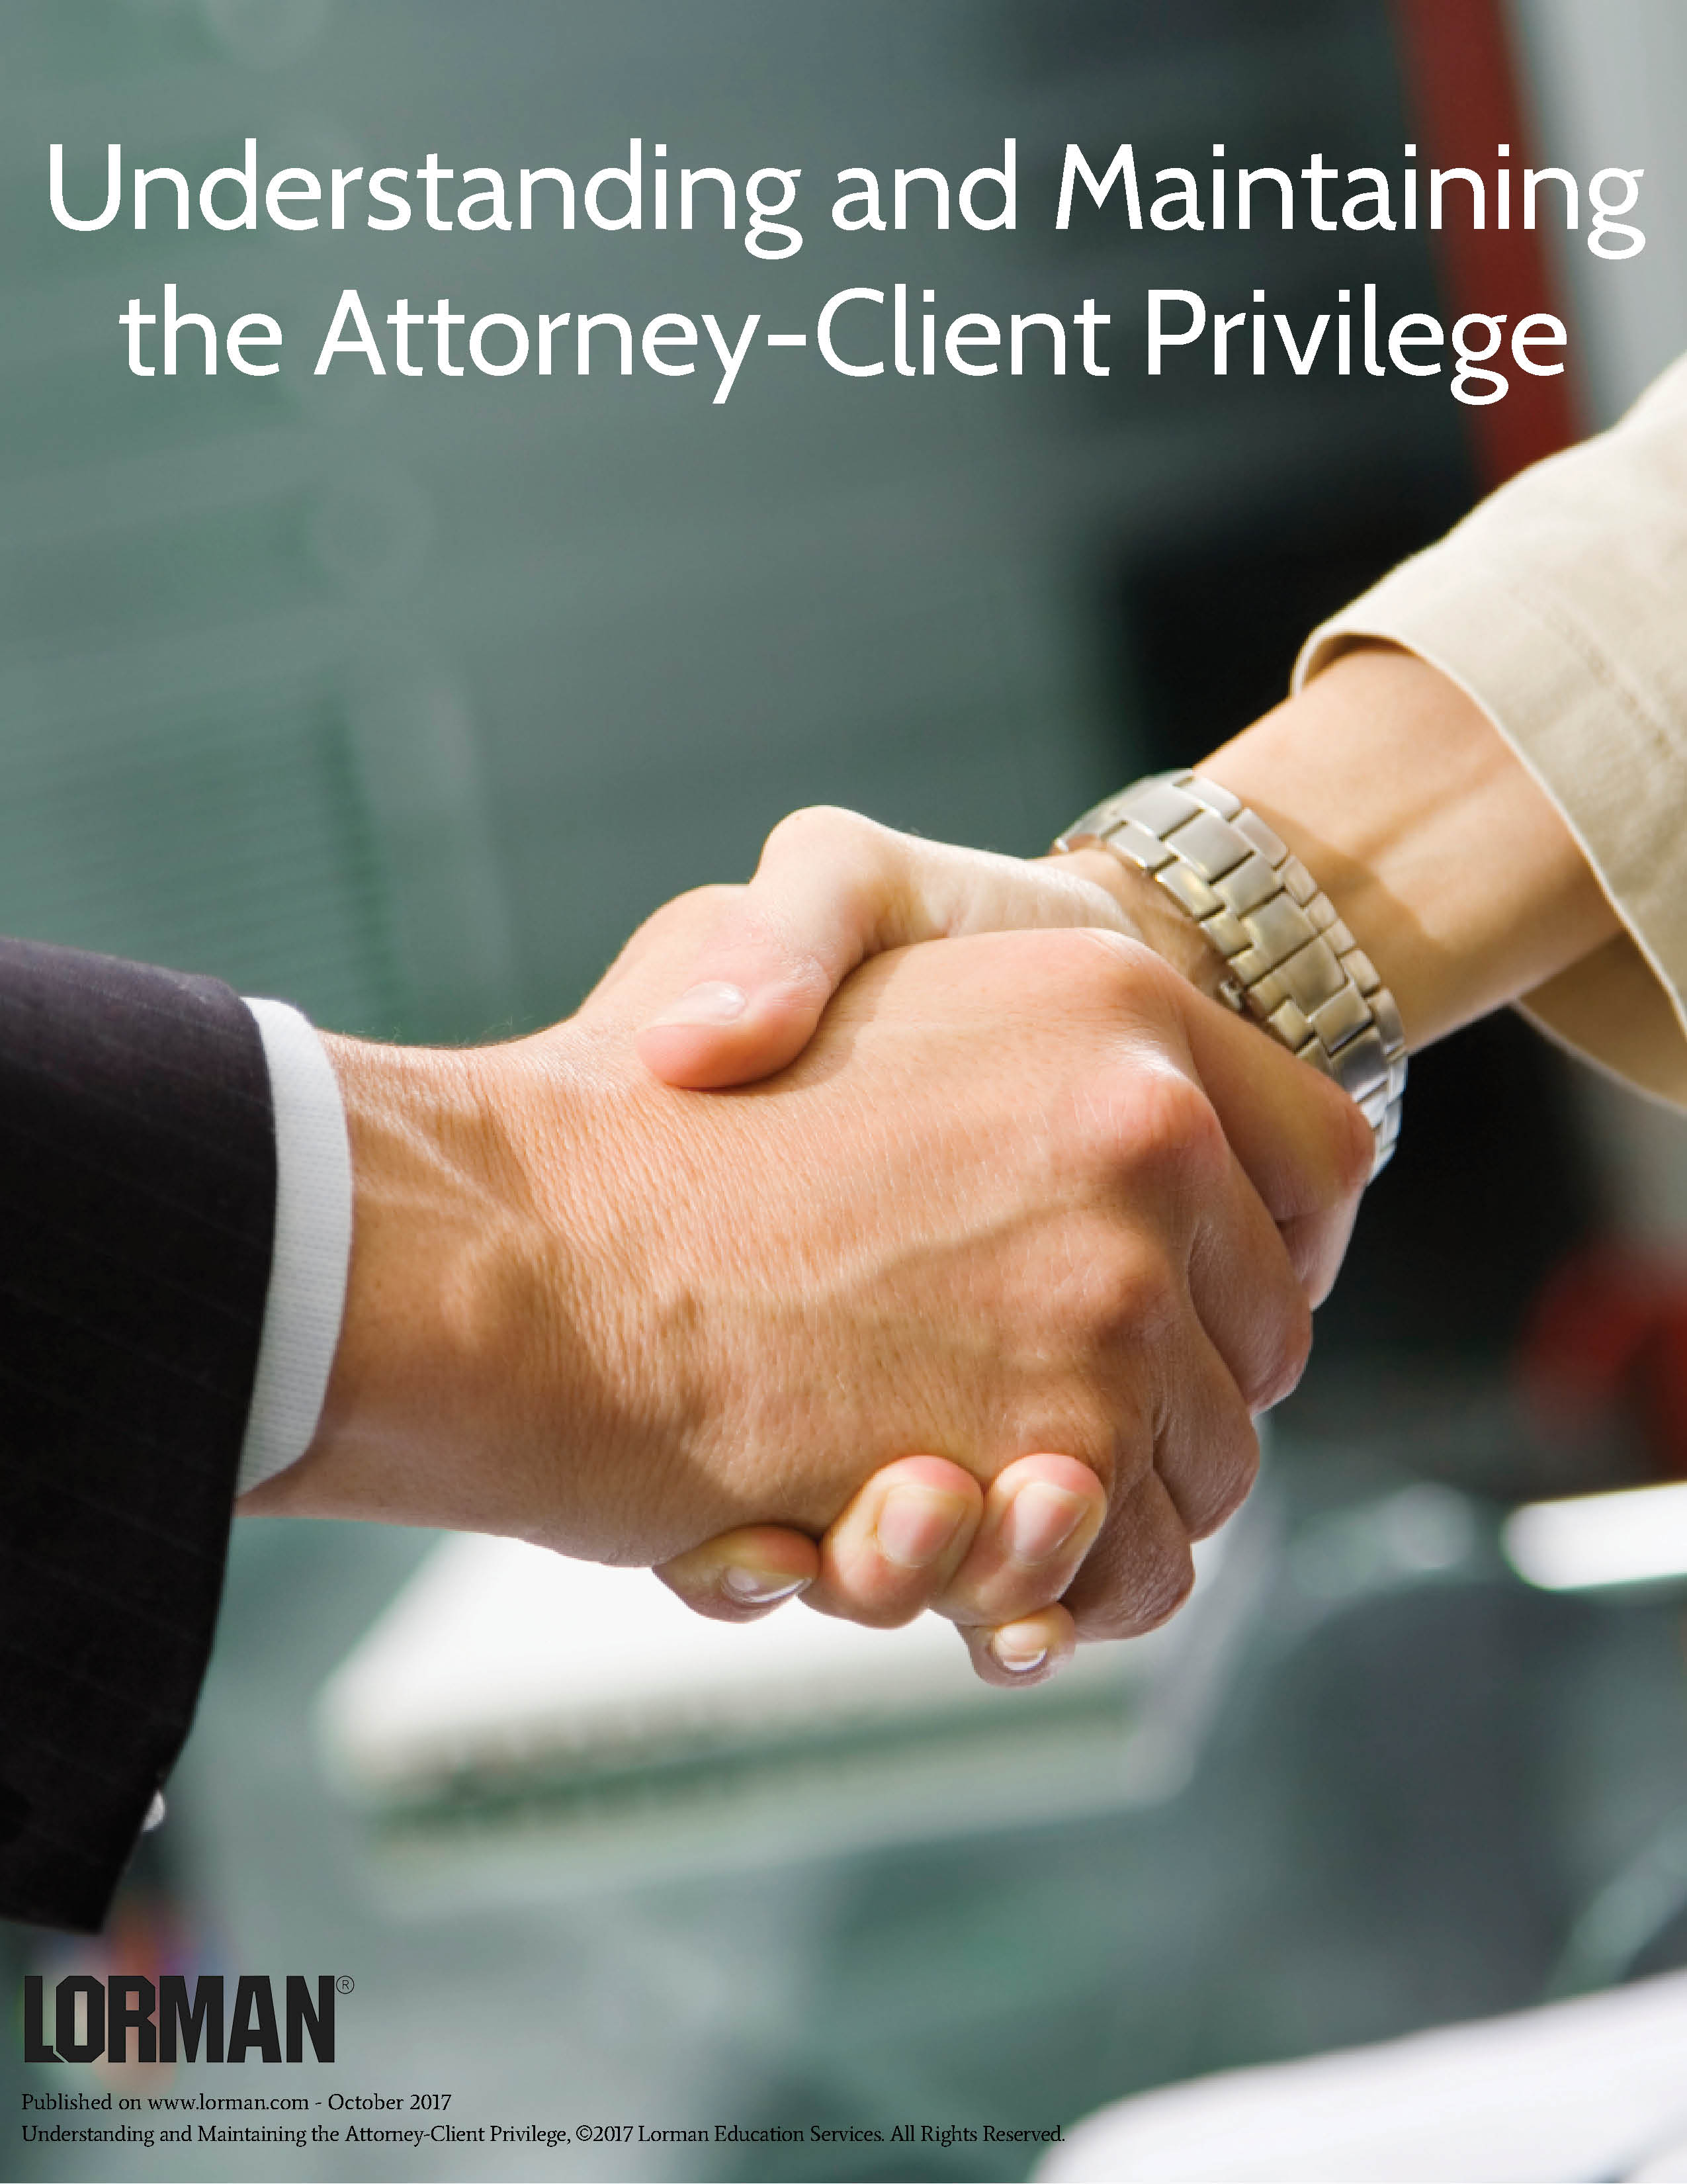 Understanding and Maintaining the Attorney-Client Privilege